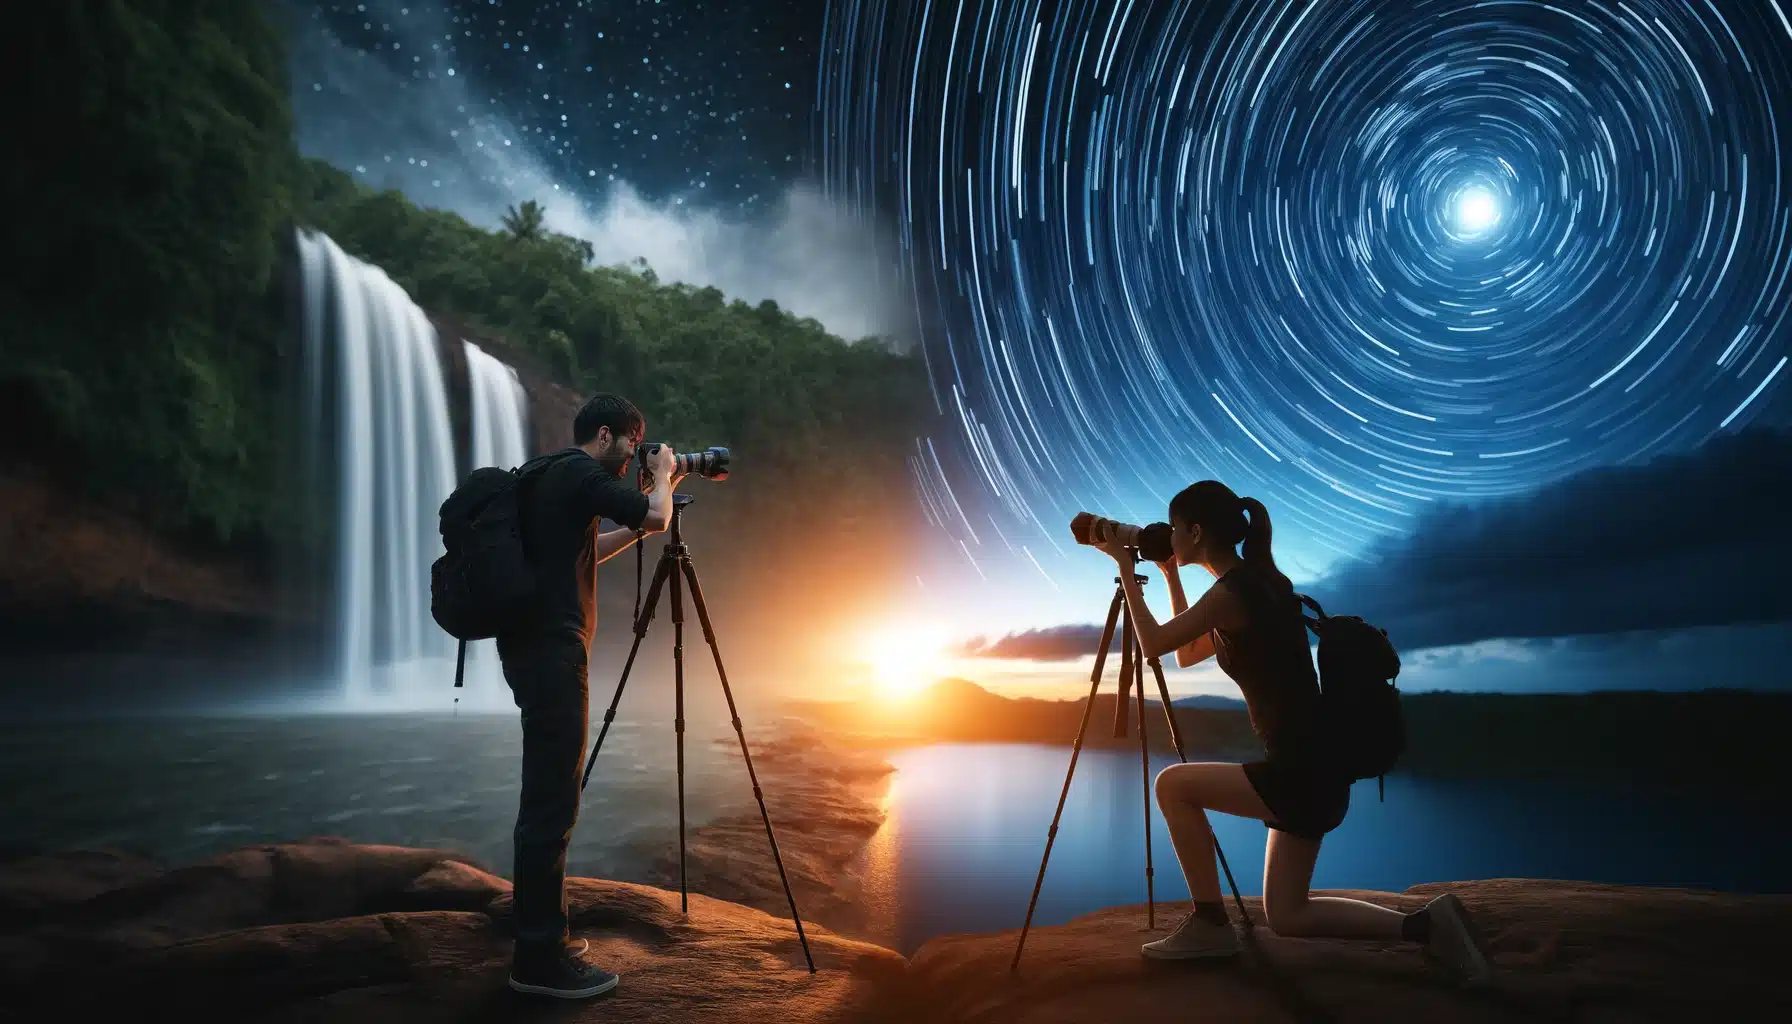 Two people engaged in long exposure landscape photography with cameras on tripods, capturing a waterfall and star trails